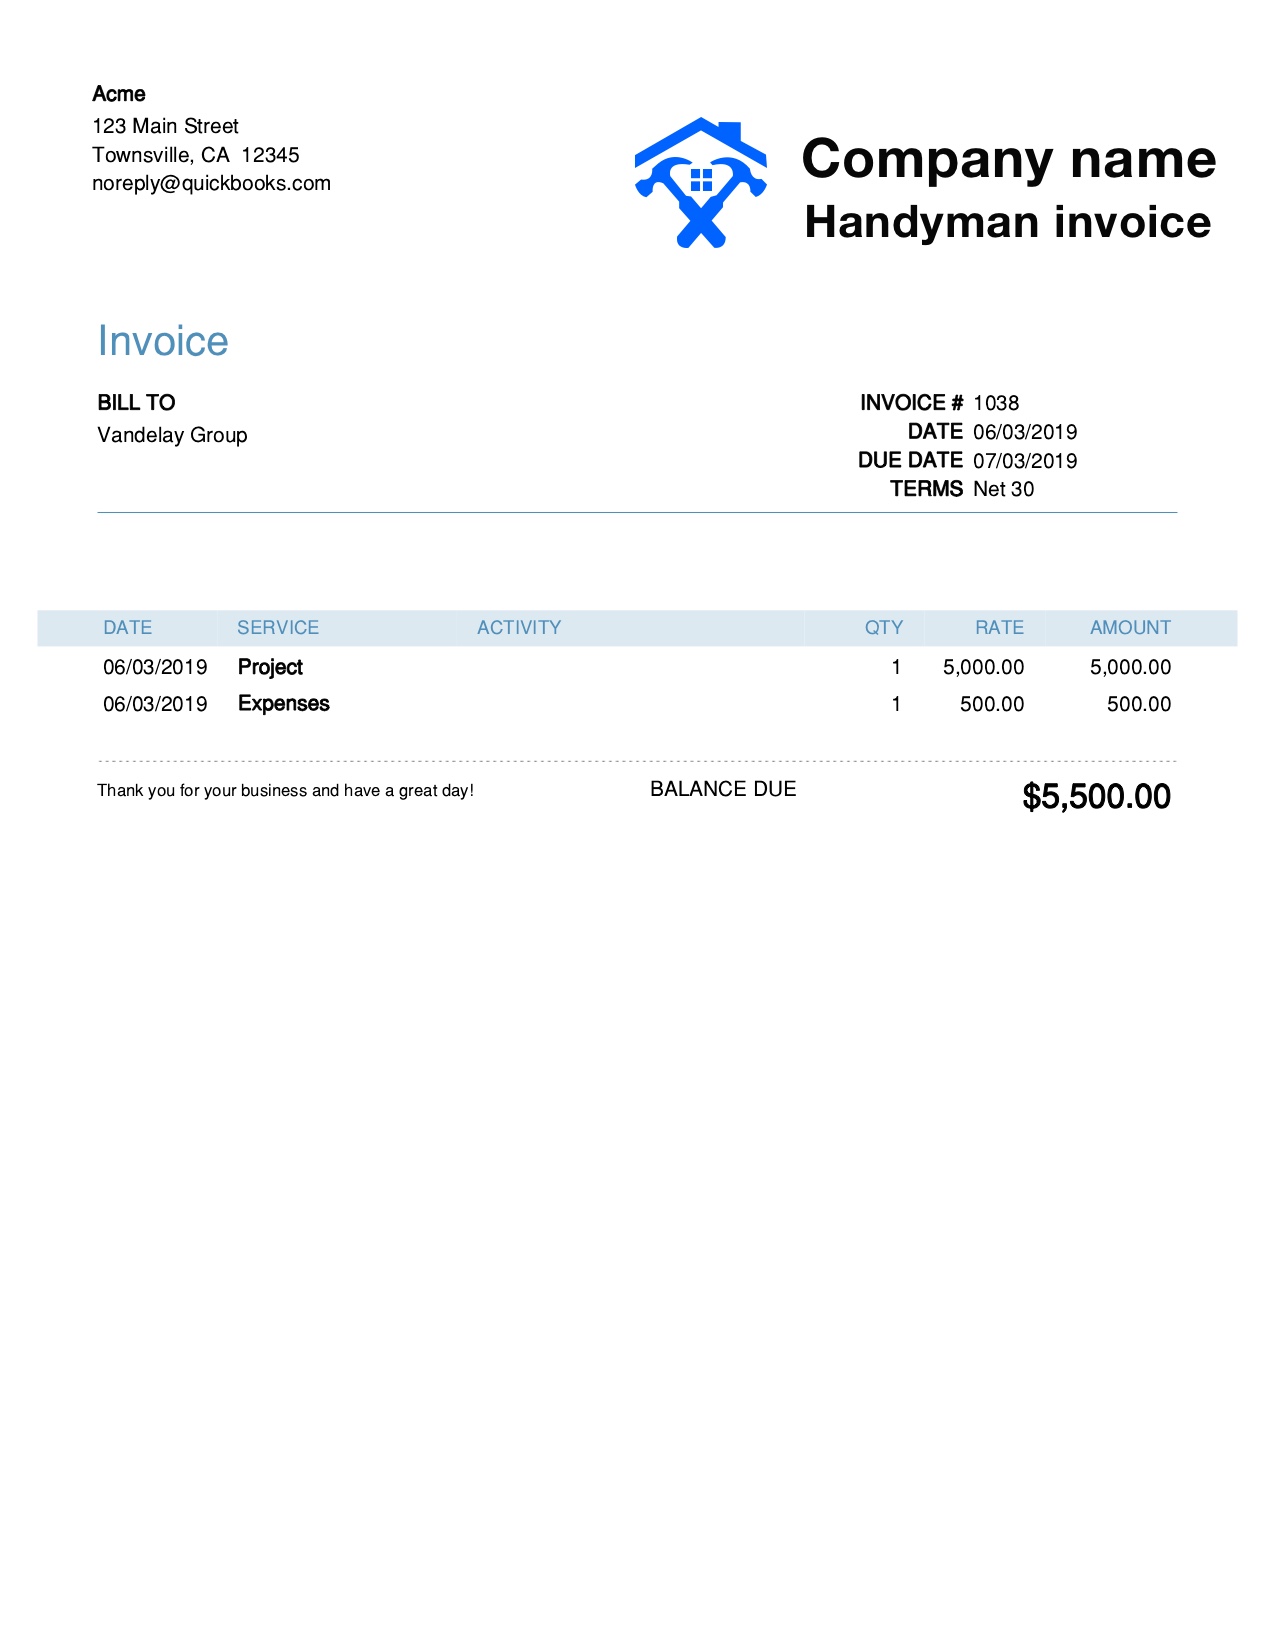 Free Handyman Invoice Template. Customize and Send in 90 Seconds